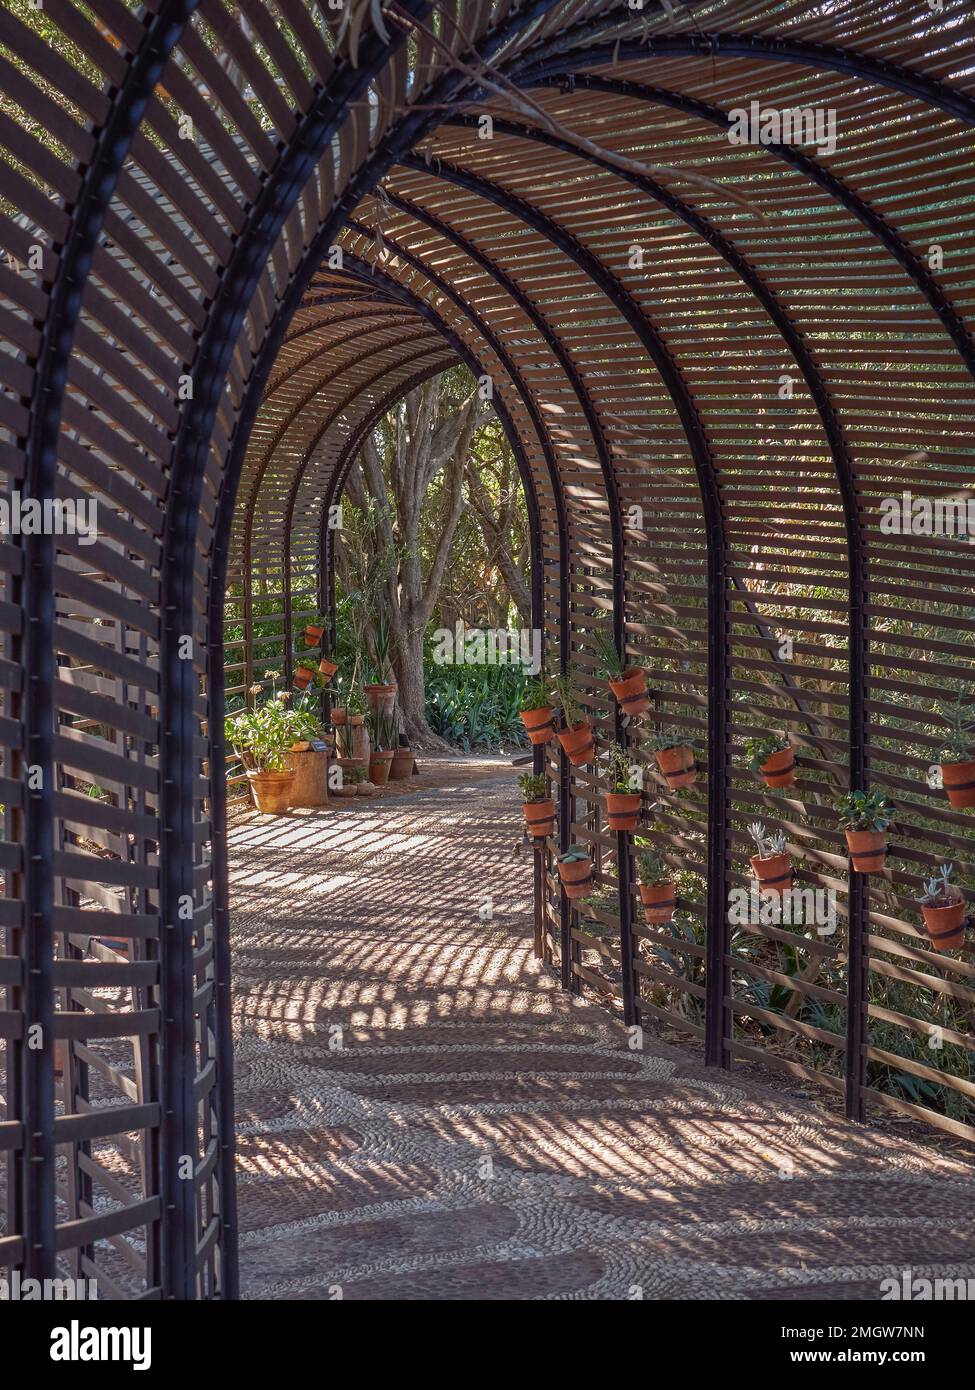 An Arched walk way made of metal and wood in a garden in Cape Town  South Africa Stock Photo